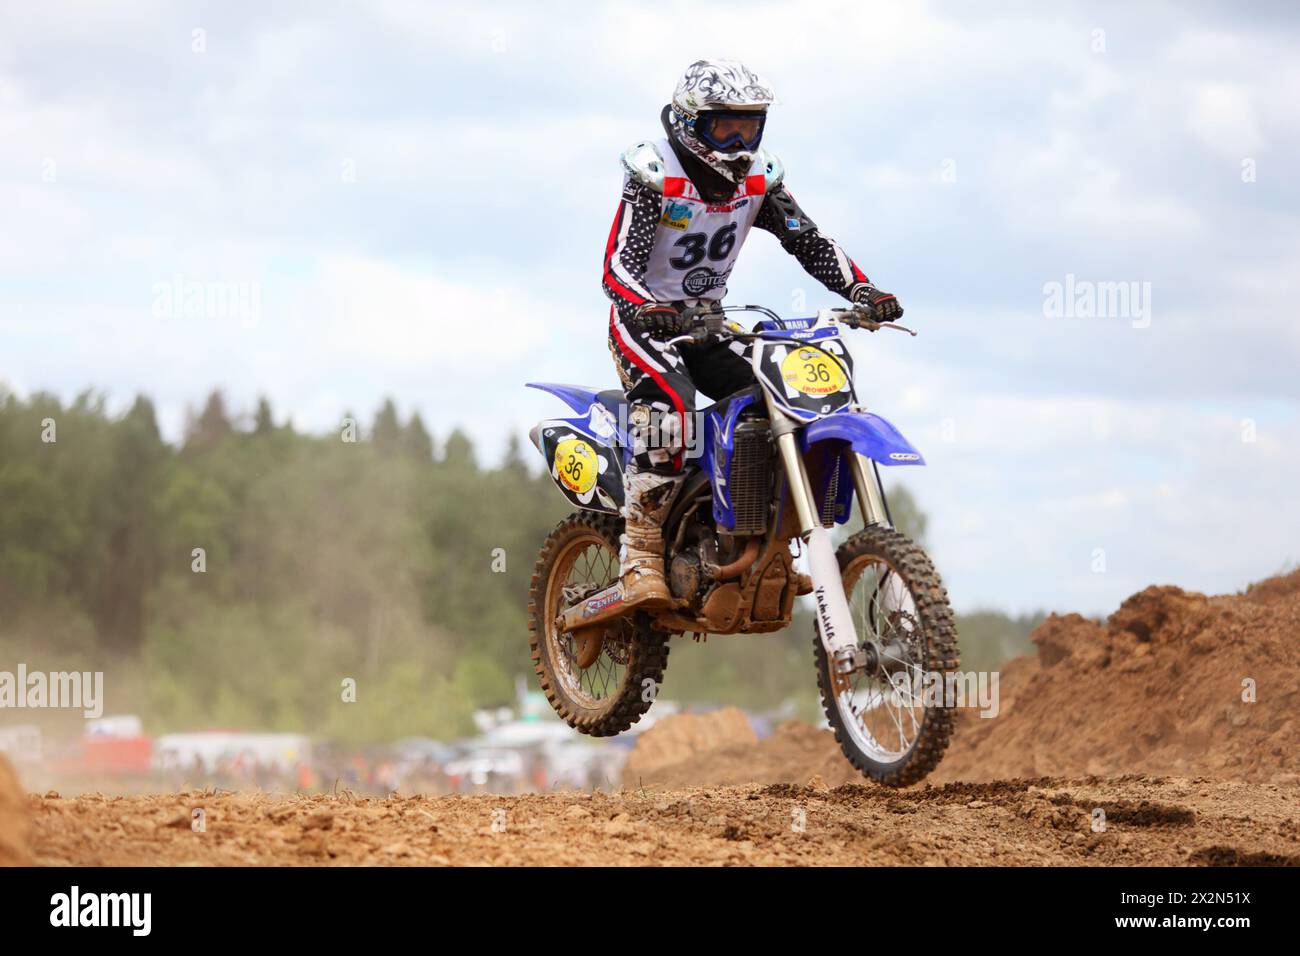 RAKOVO - JUNE 4: Motor-cyclist at first stage of race in enduro-cross series IronManmotorcycling at X-ARENA on June 4, 2011 in Rakovo village near Mos Stock Photo